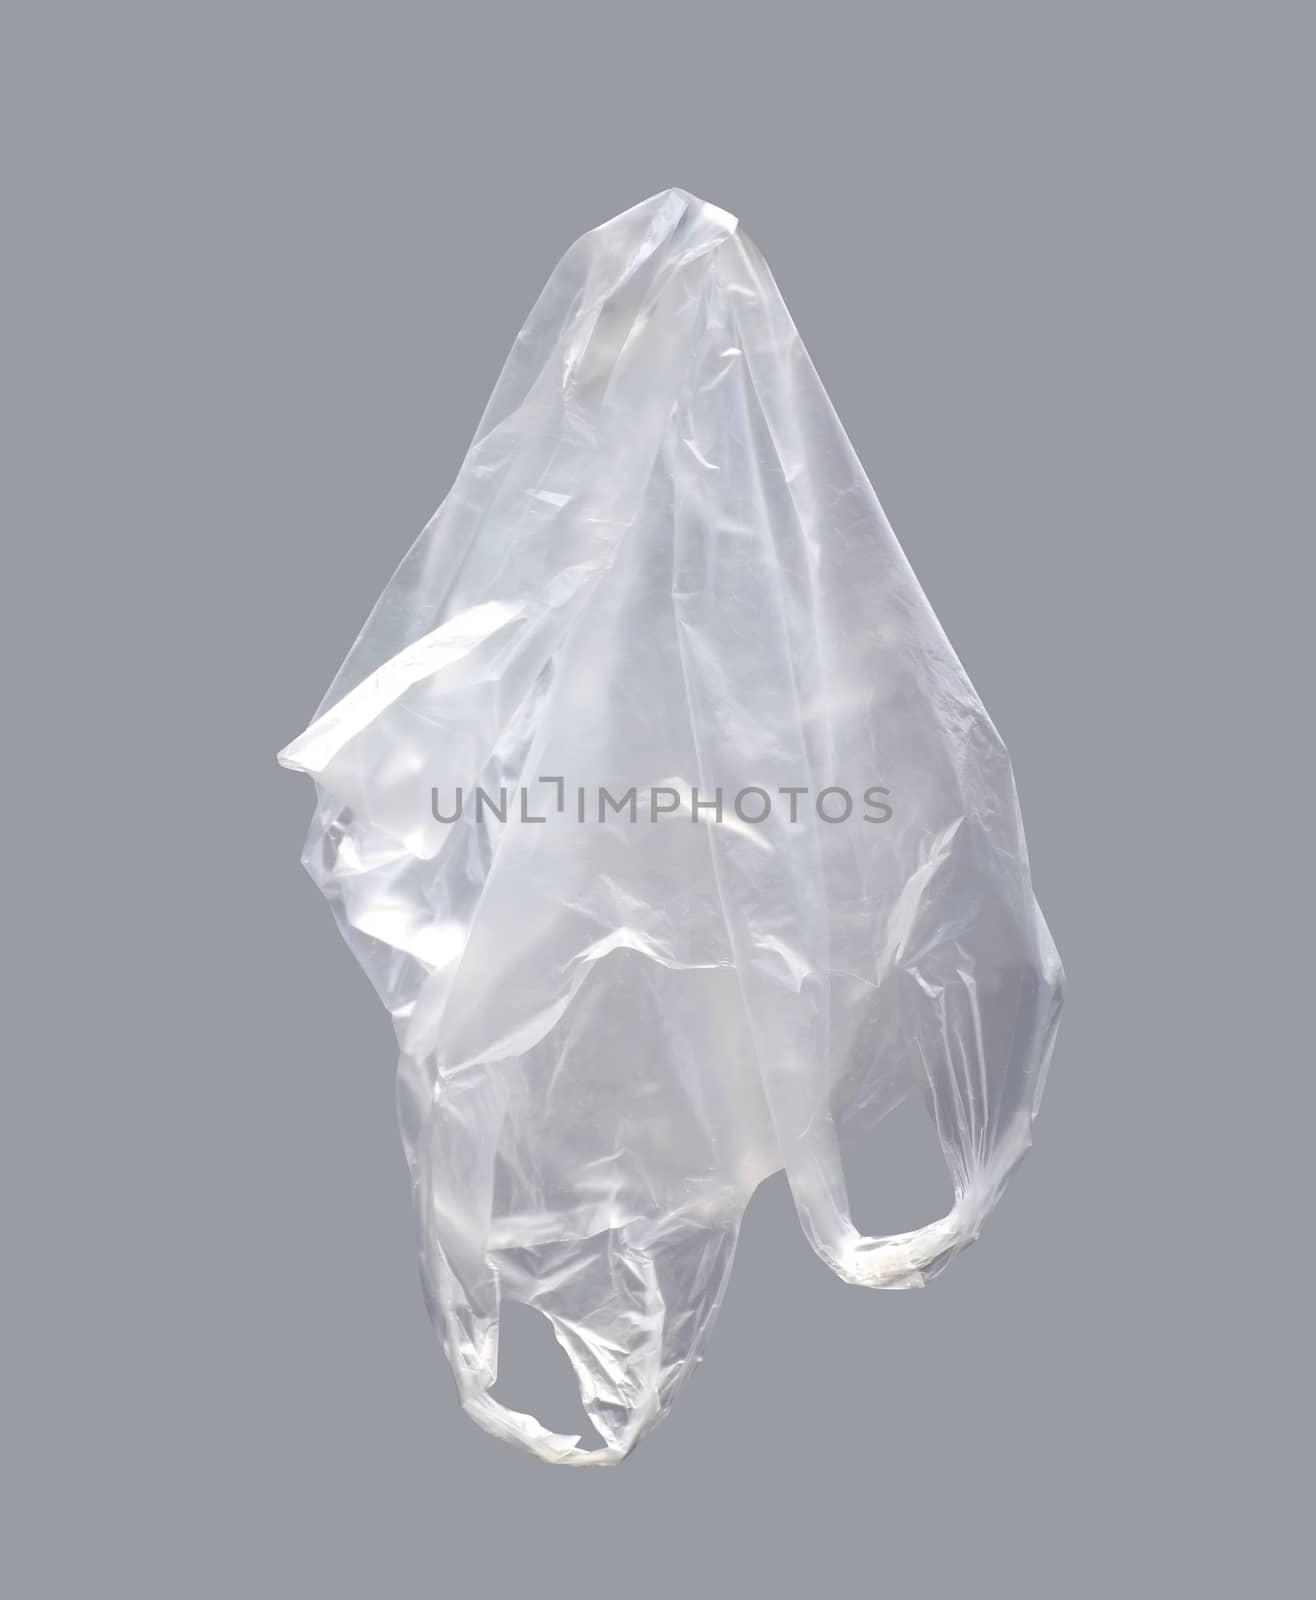 Plastic bag, Clear plastic bag on gray background, Plastic bag clear waste, Plastic bag clear garbage, Pollution from garbage waste bags